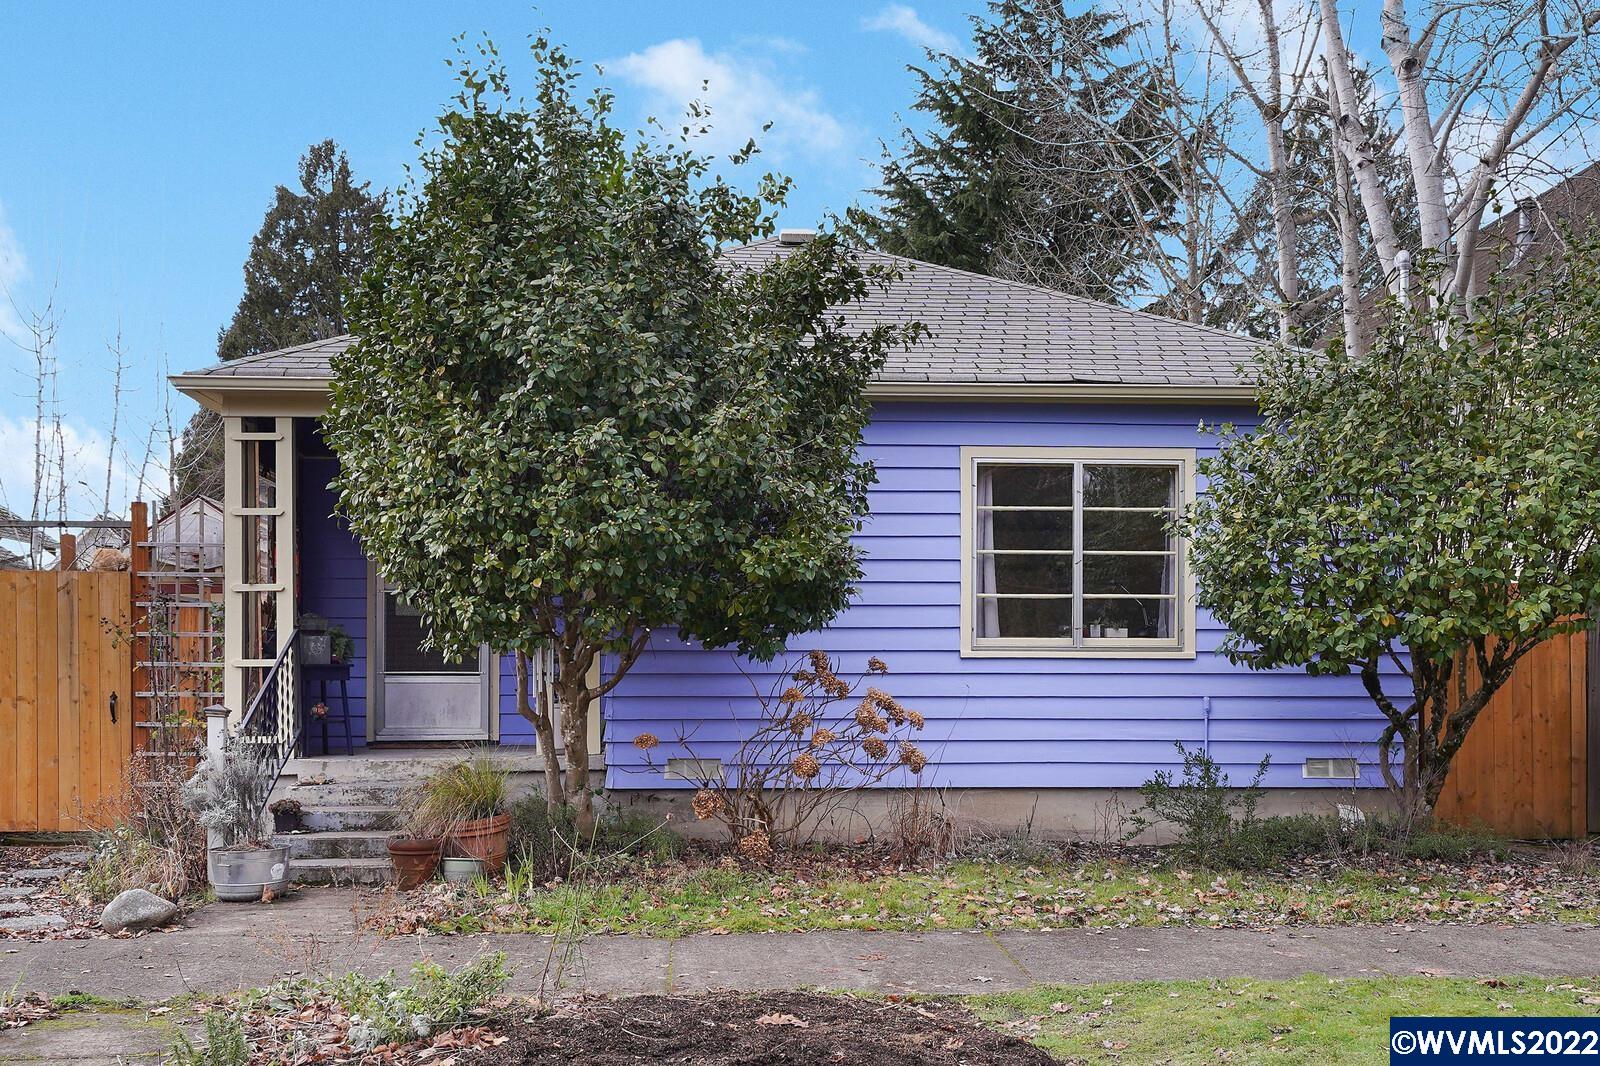 Accepted Offer with Contingencies. Adorable cottage ideally located near OSU, downtown and shopping. Features include updated electrical, new appliances with gas range and original hardwoods. Enjoy classic charm with modern ammenities in this cute Corvallis home. Open House Sunday 1/23 1-3